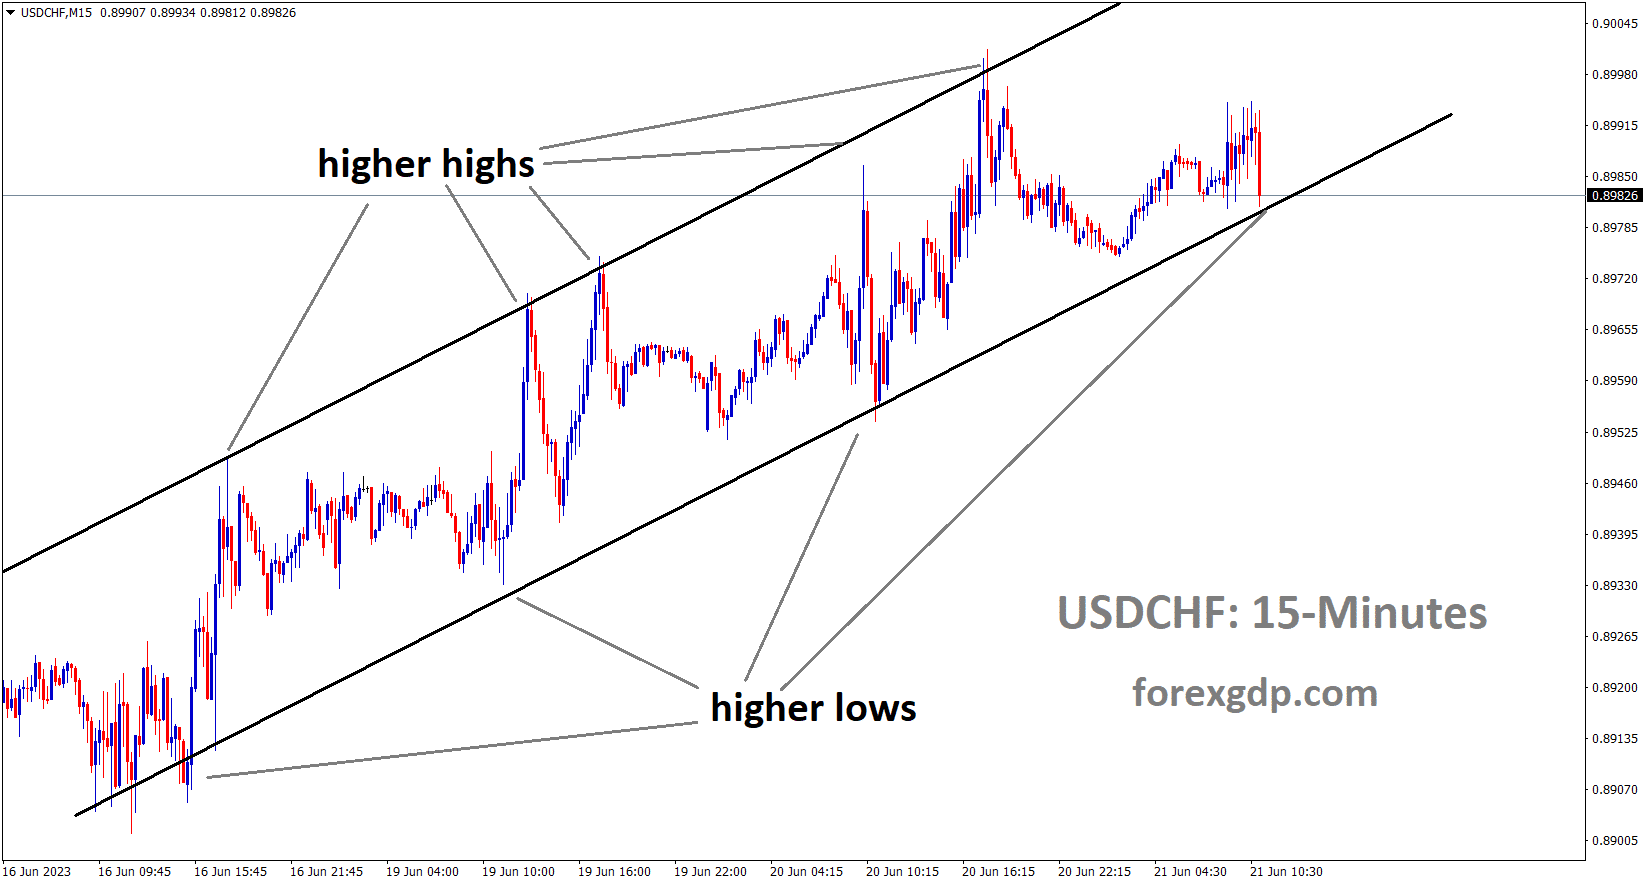 USDCHF is moving in an Ascending channel and the market has reached the higher low area of the channel 1